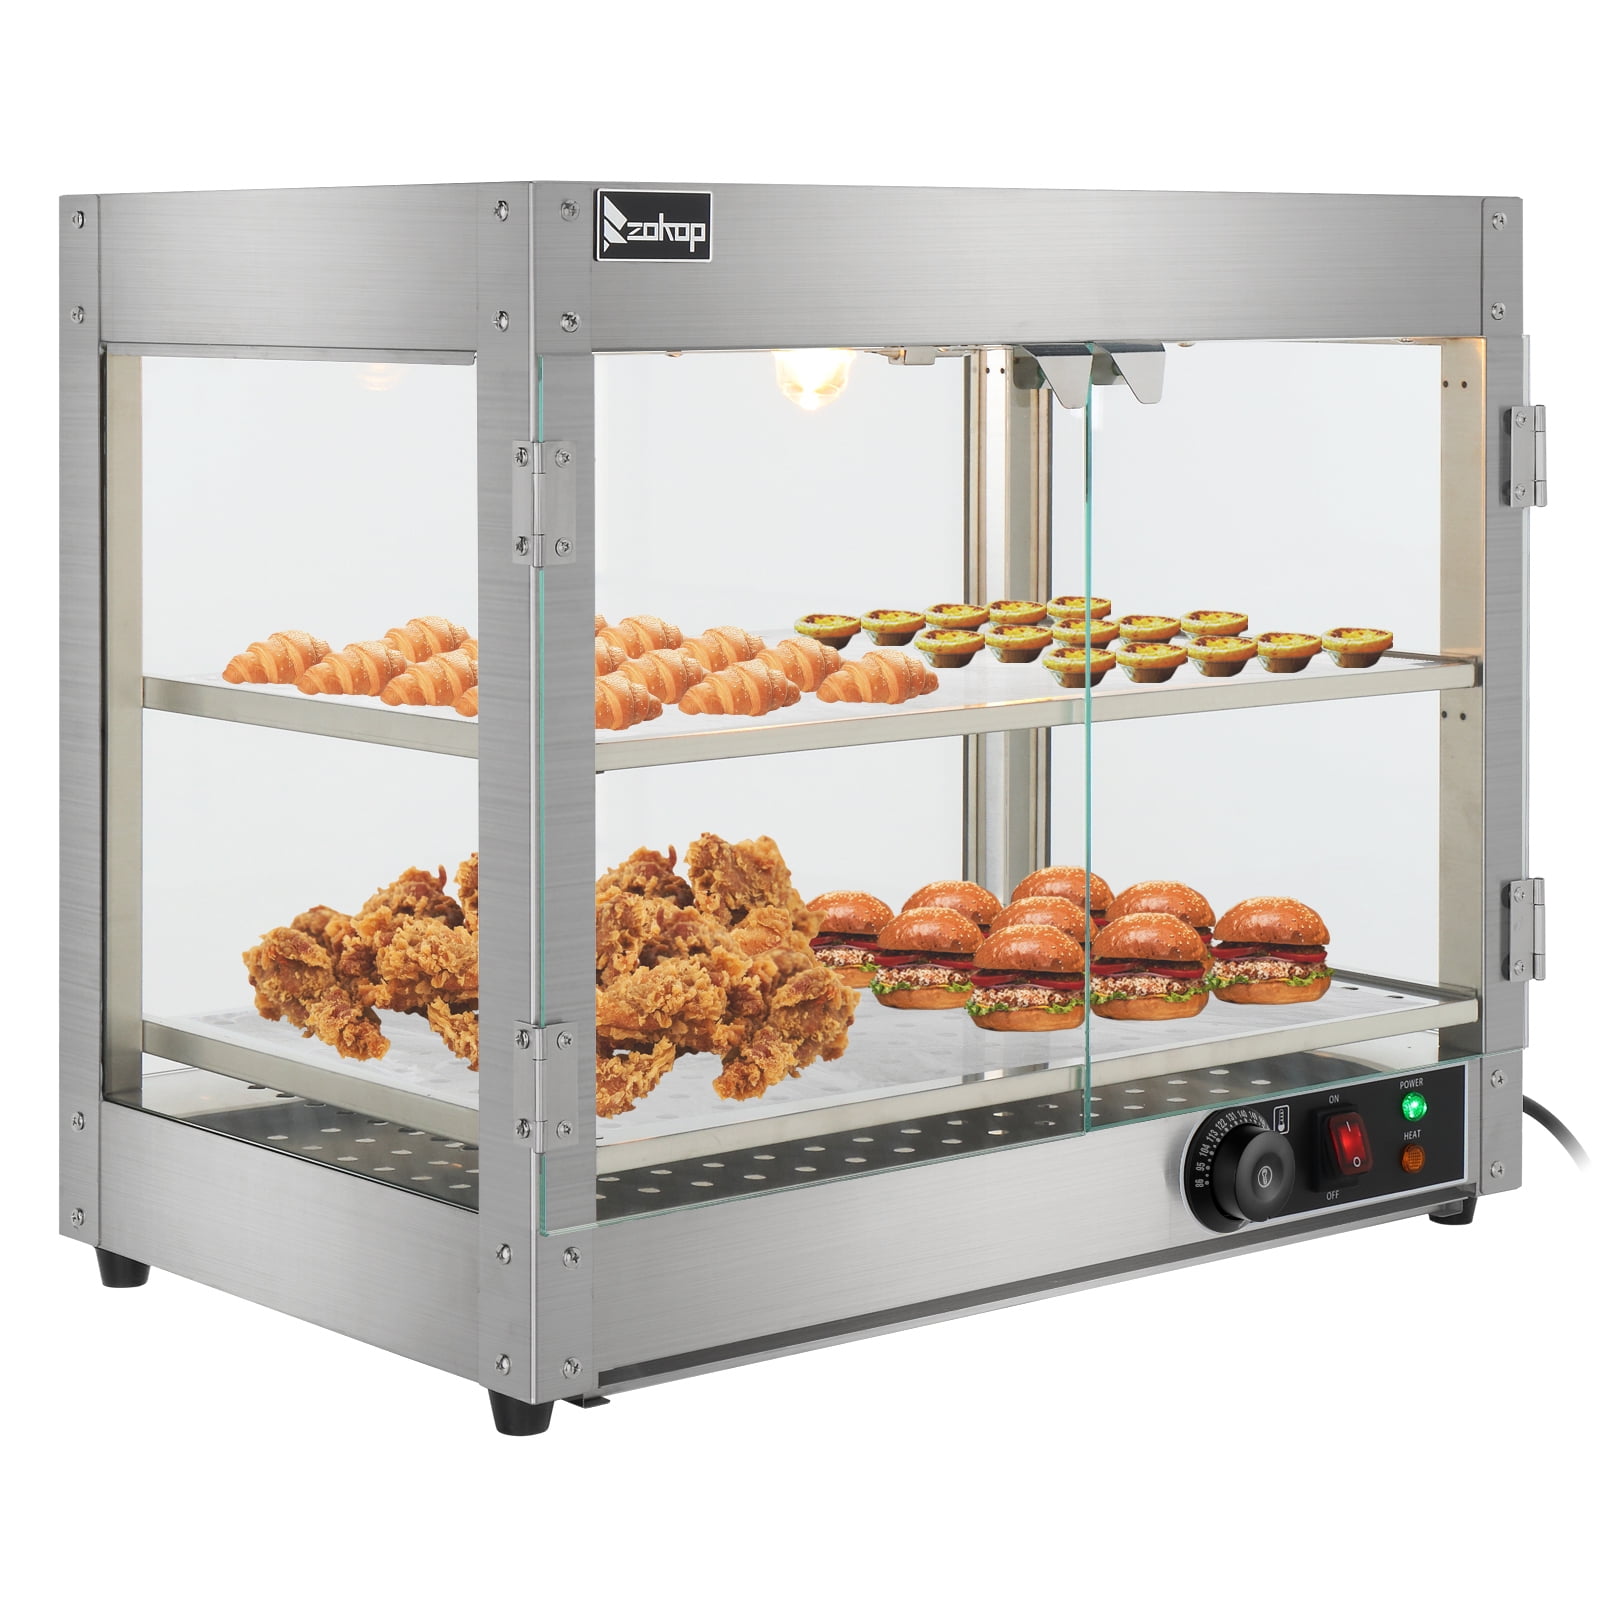 WeChef 2-Tier Pizza Warmer Countertop 24 Commercial Food Warmer Display  w/Removable Trays Light Bulb Pastry Display Case for Restaurant Cafe Buffet